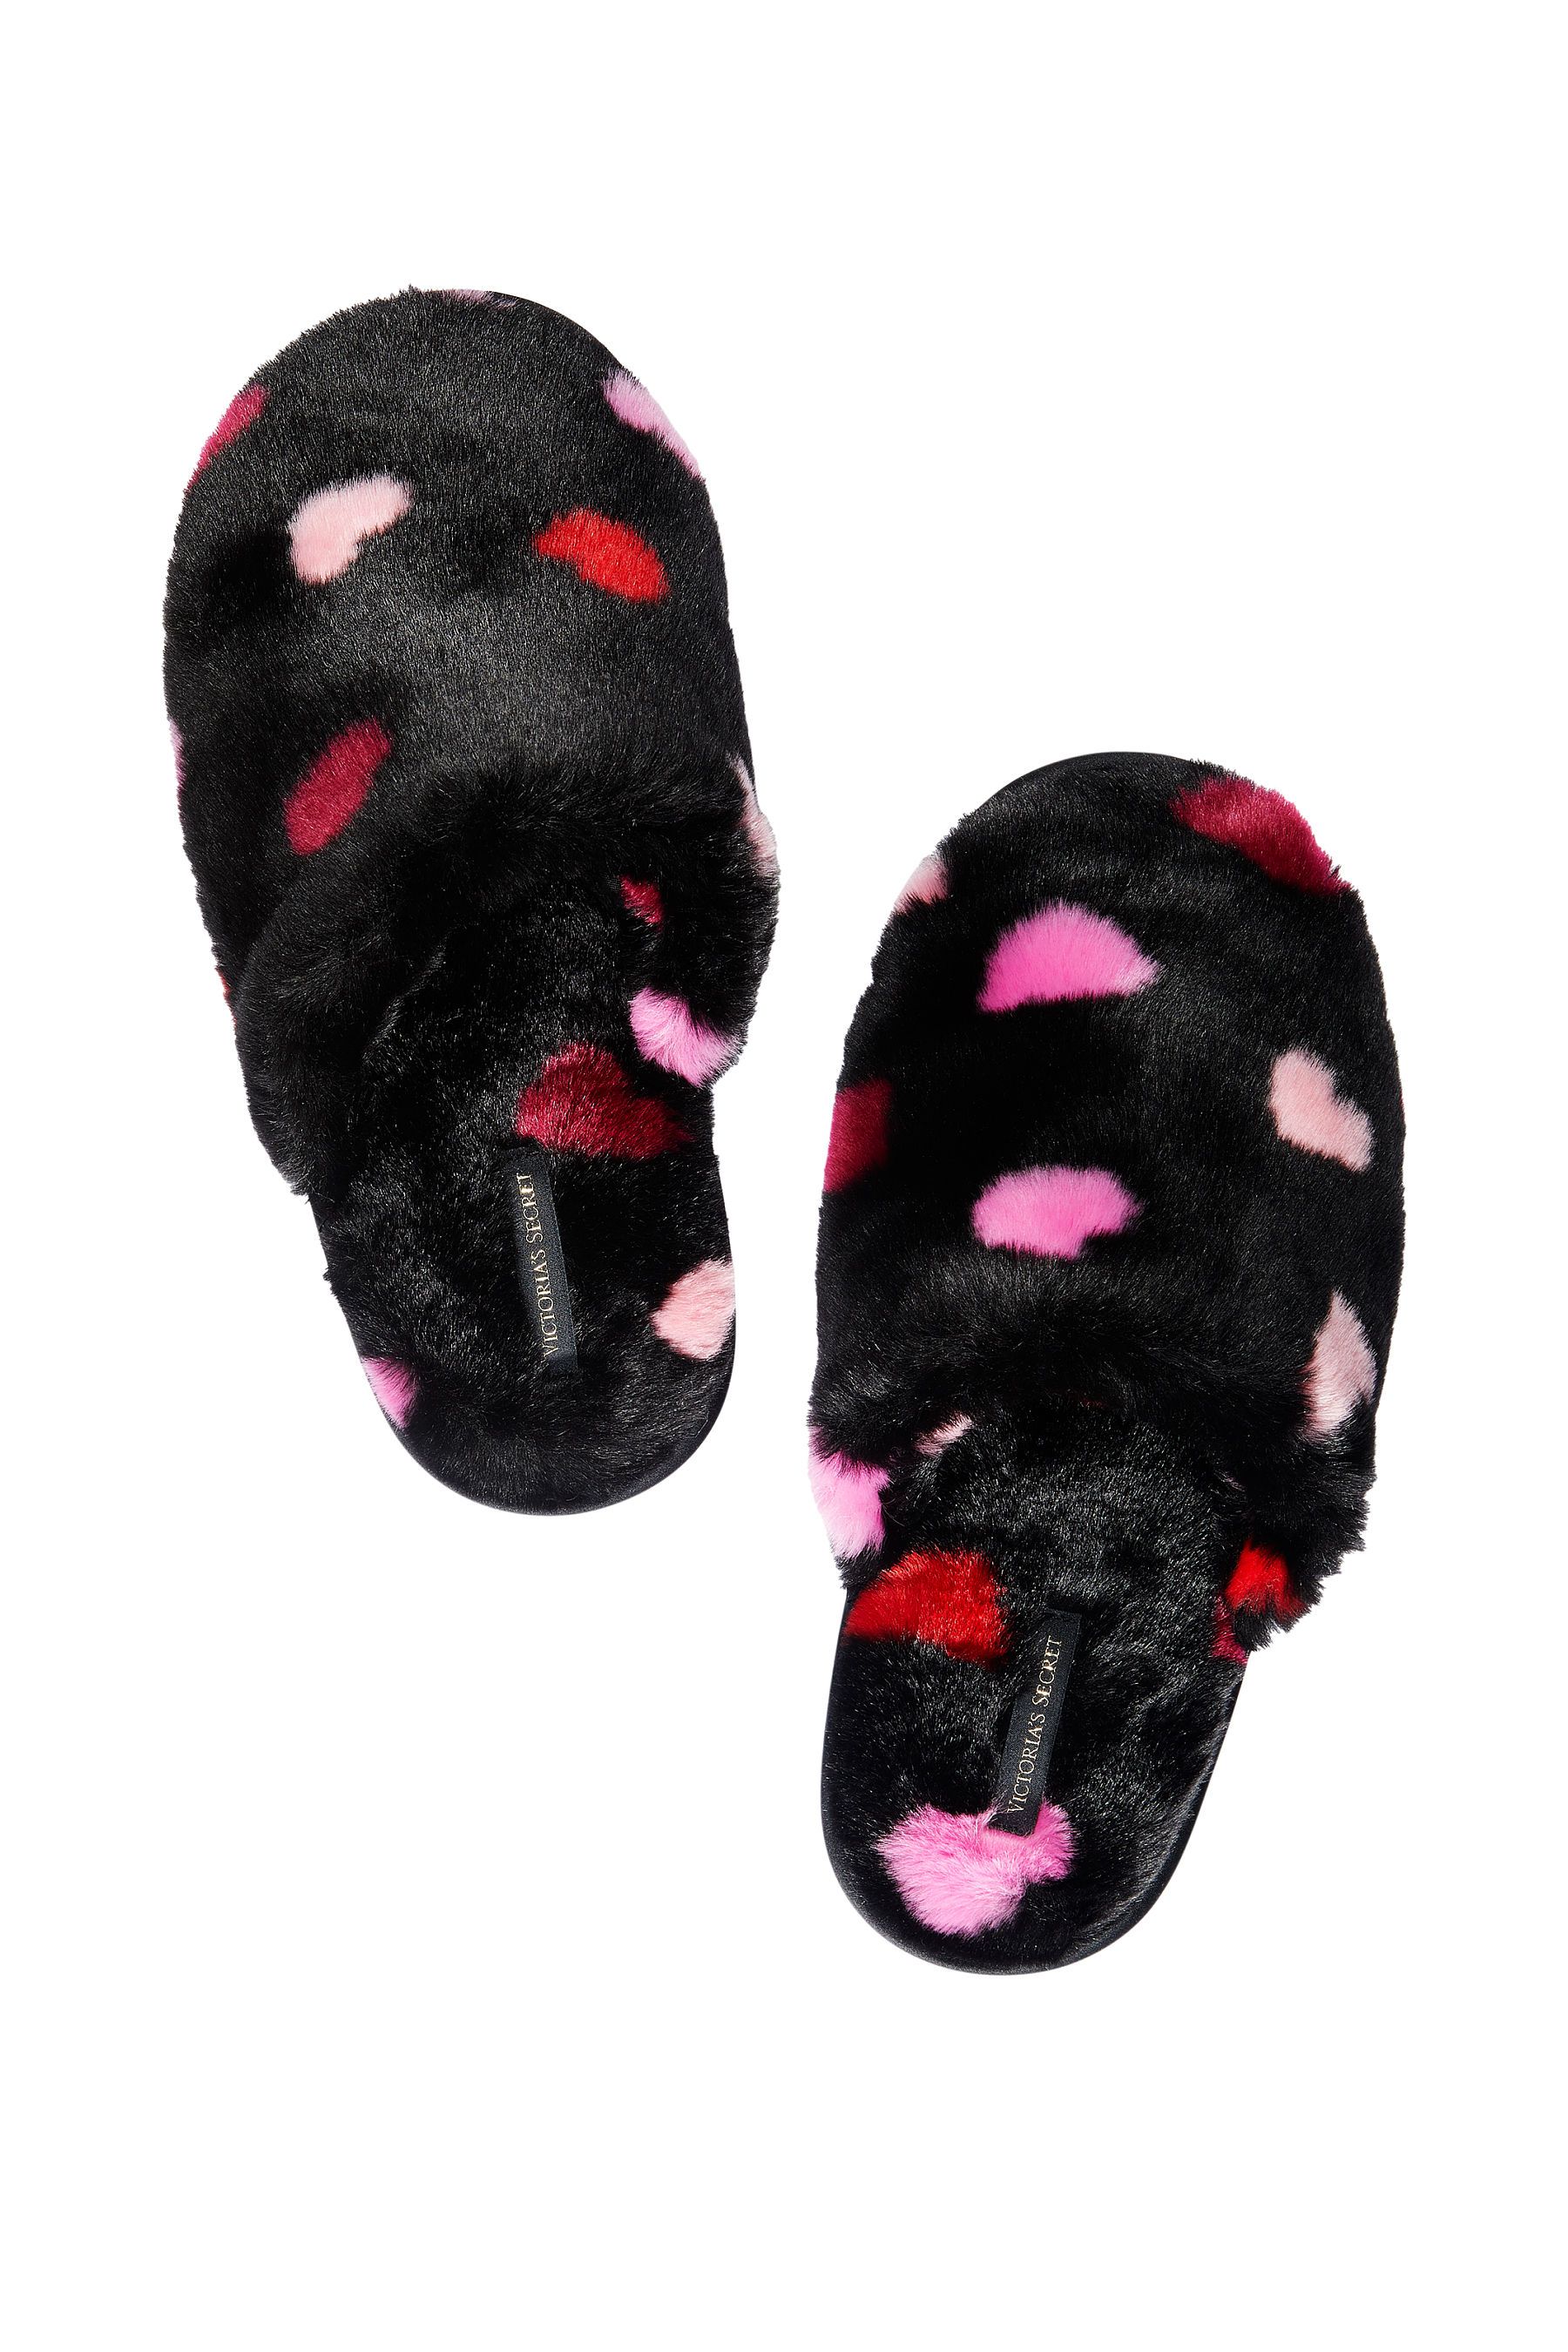 Buy Victoria's Secret Closed Toe Faux Fur Slippers from the Victoria's ...